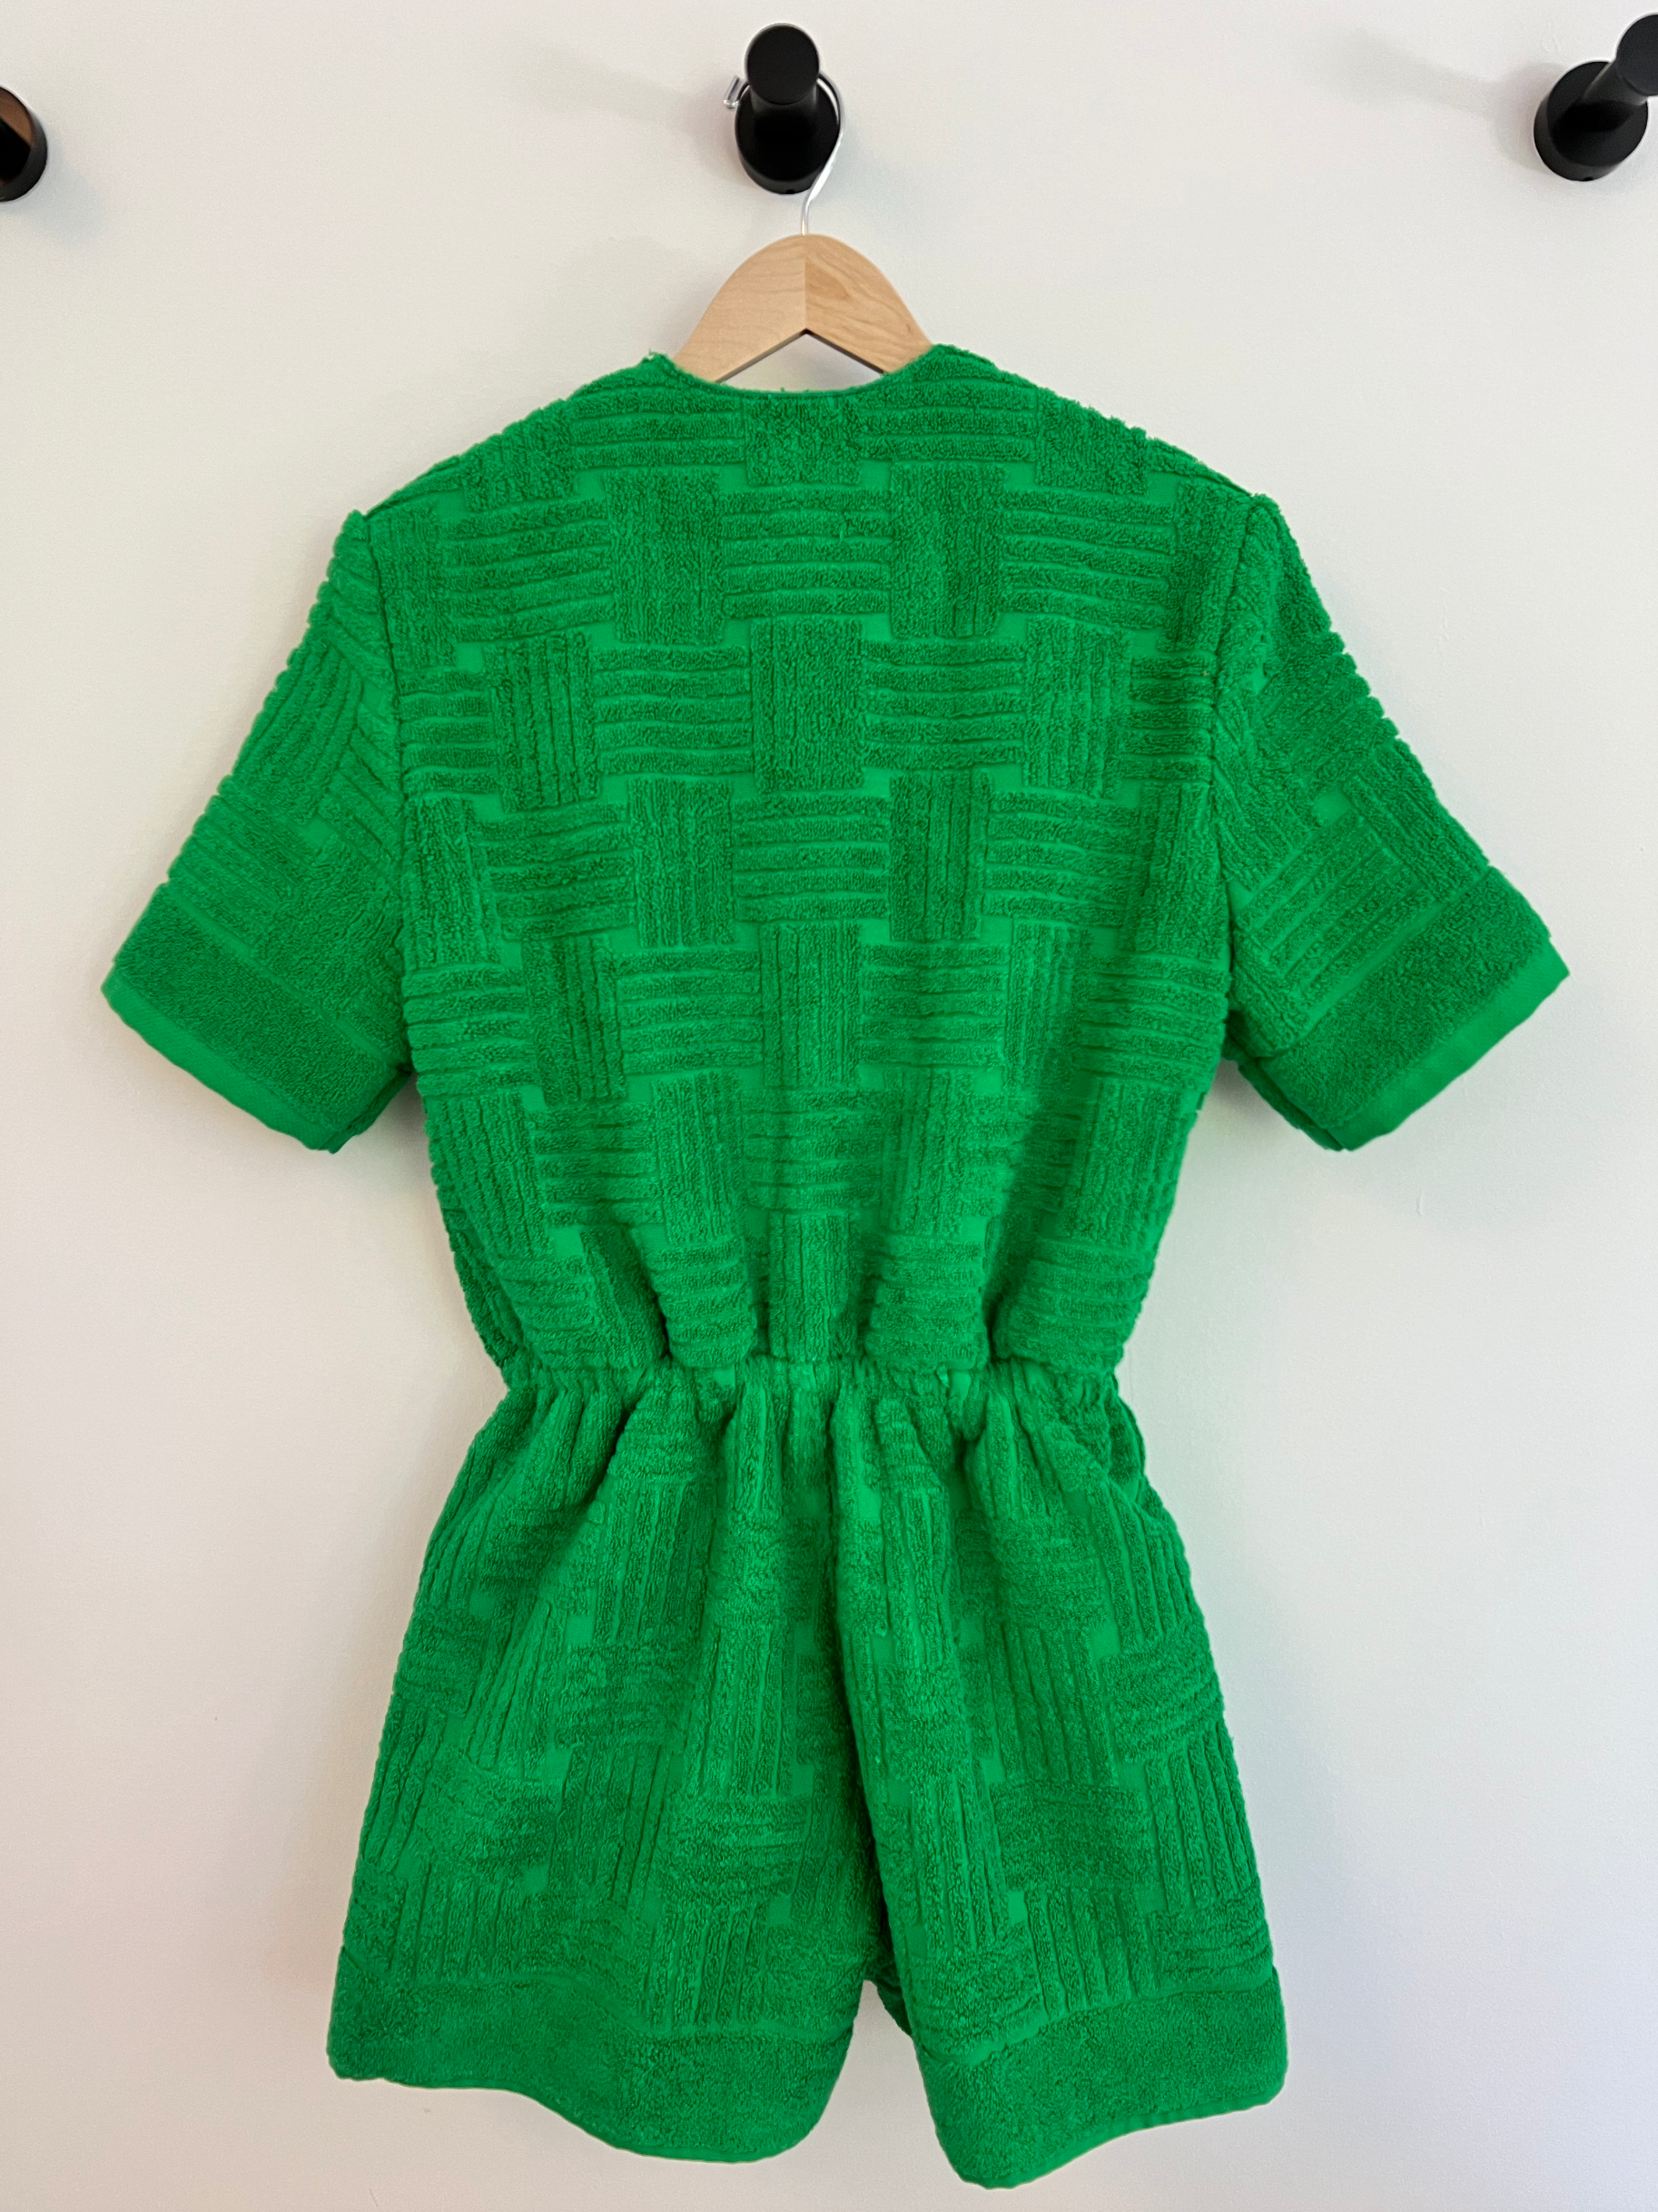 The Lime Jumpsuit